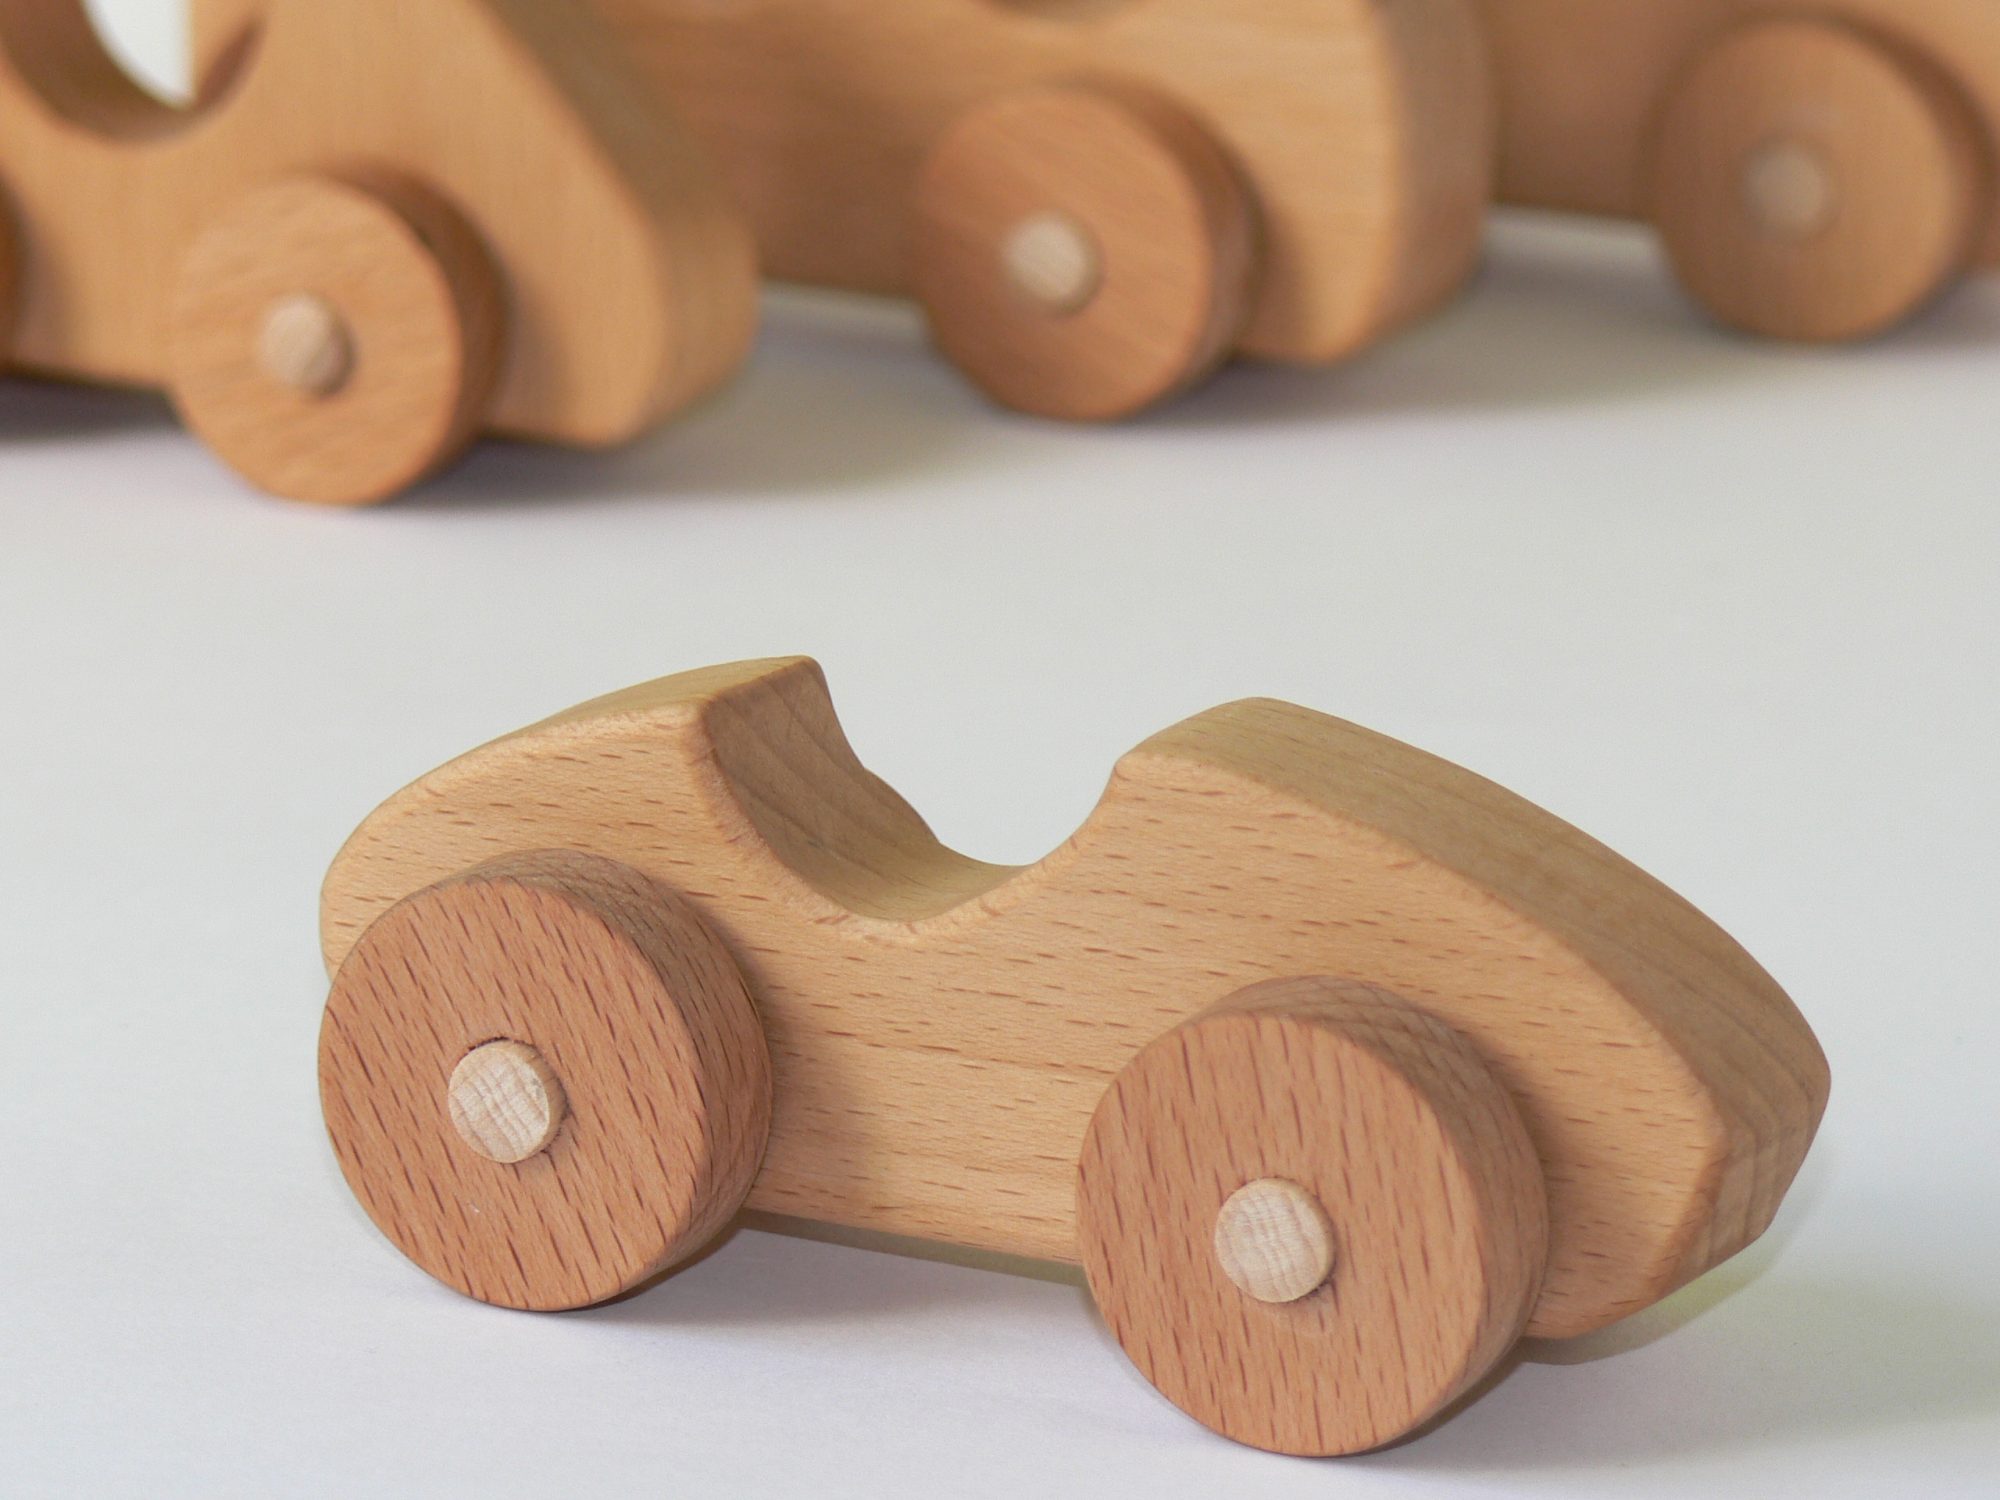 a wooden toy